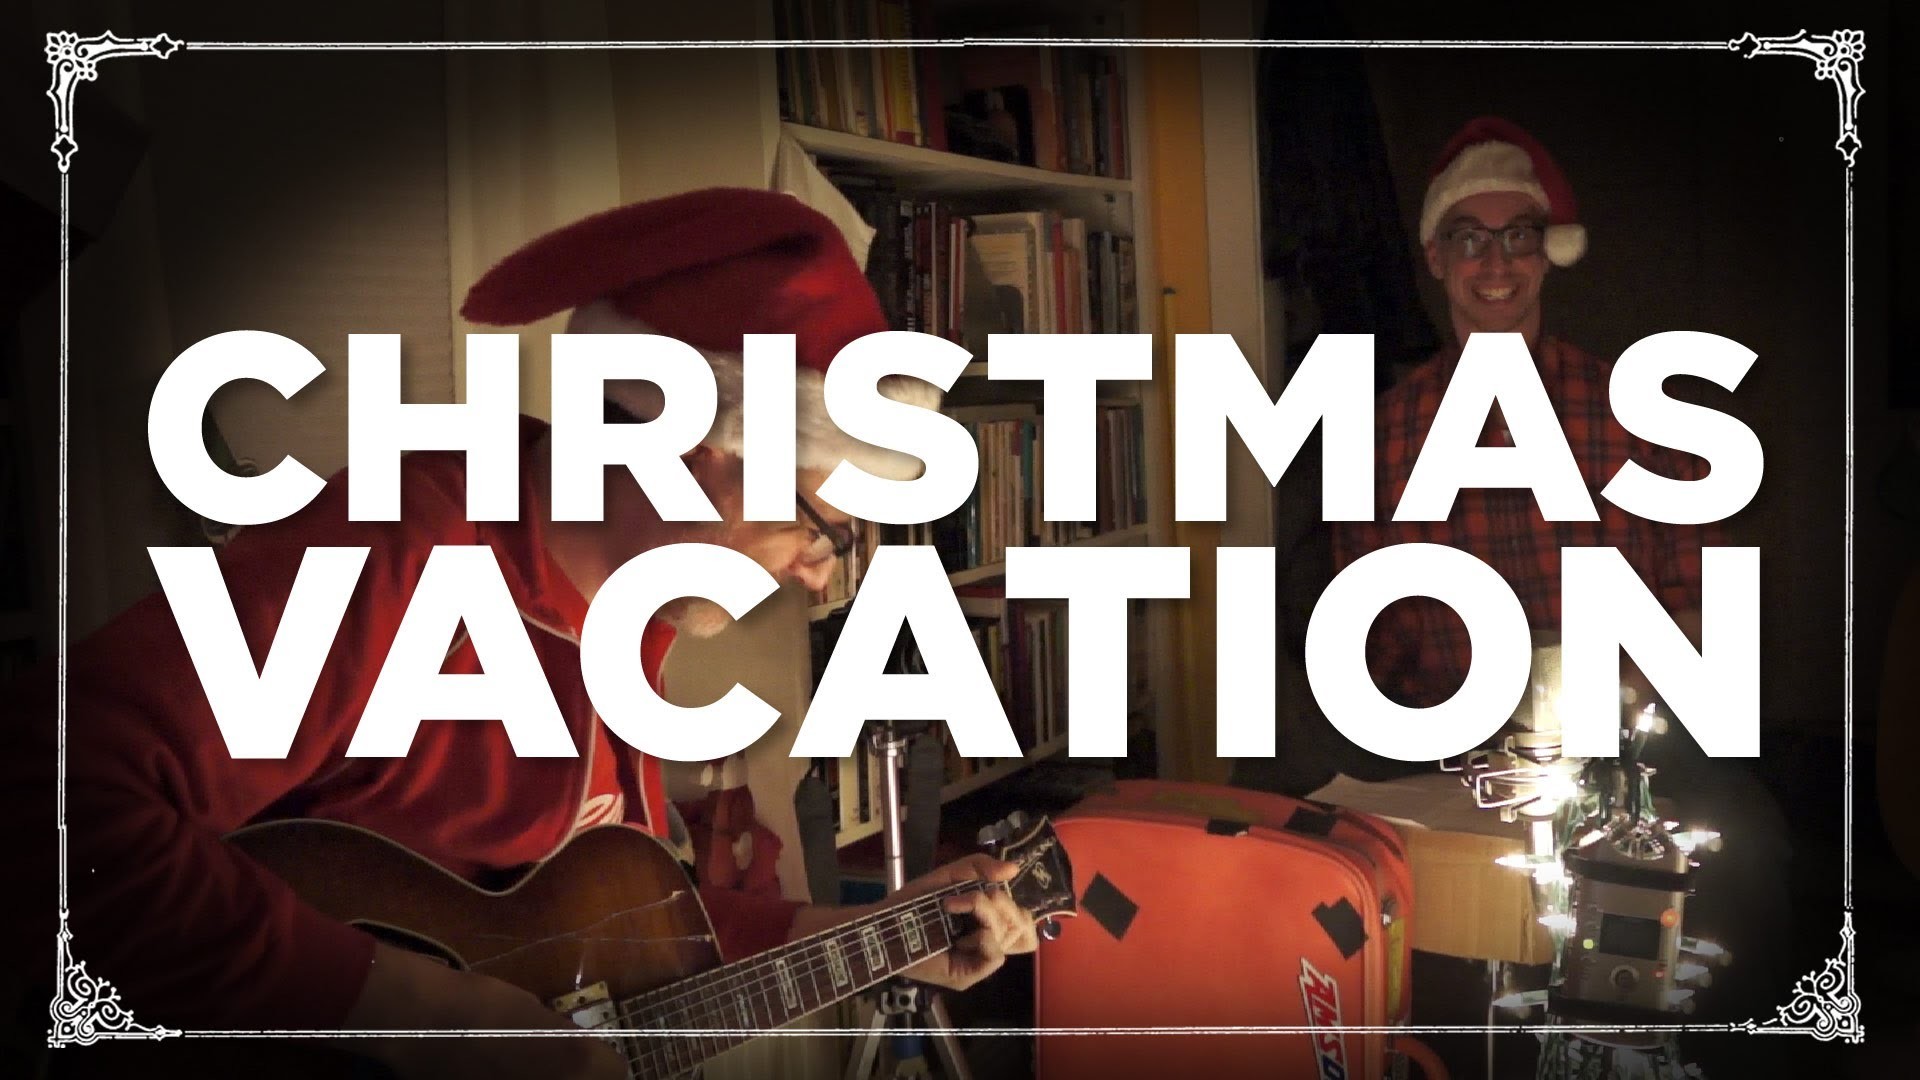 1920x1080 Theme From "National Lampoon's Christmas Vacation" (cover by The  Demographic)